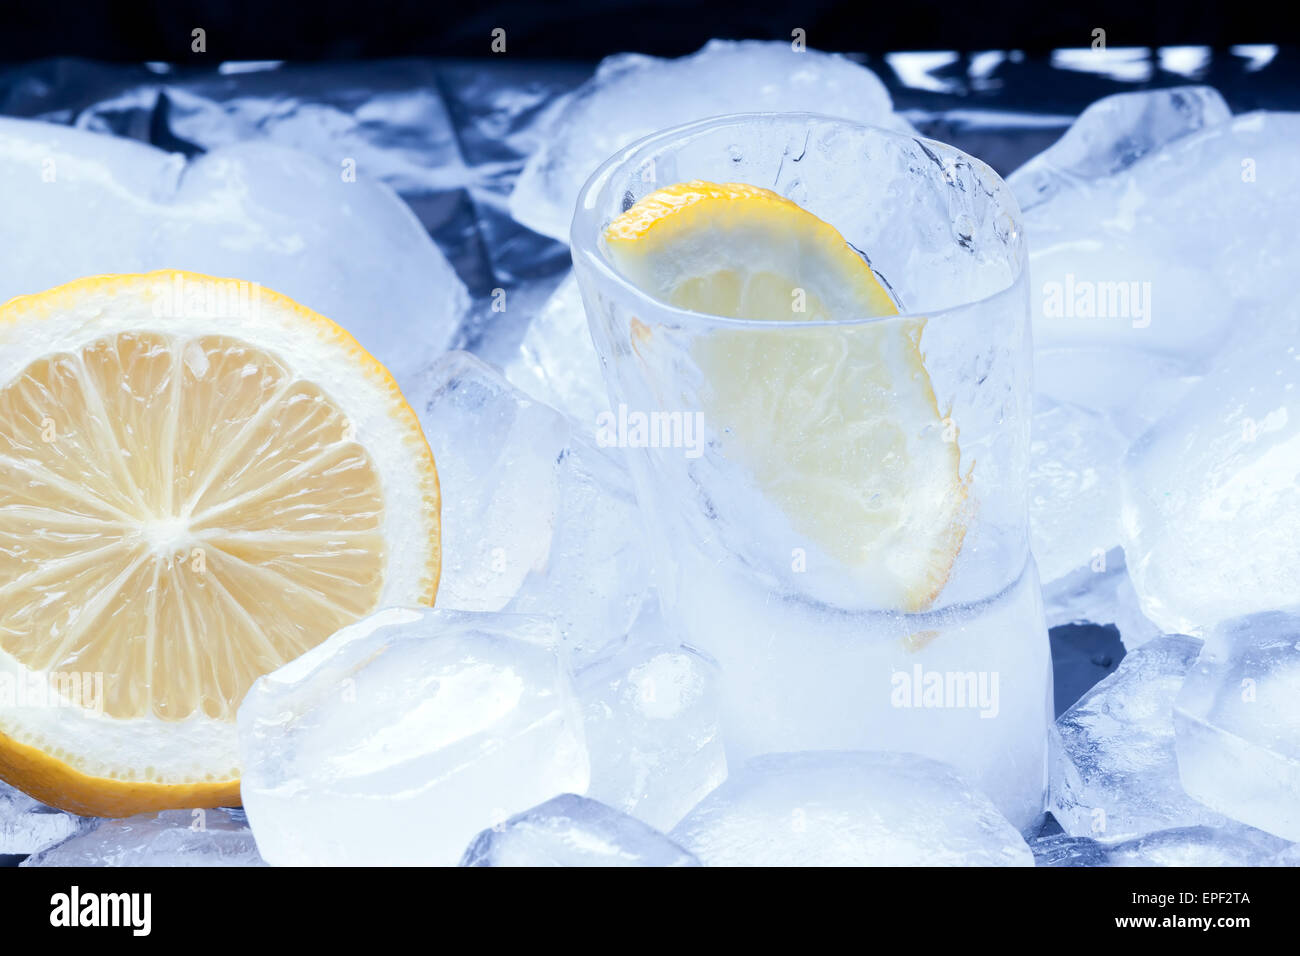 Russian vodka with lemon poured in a glass made of ice Stock Photo